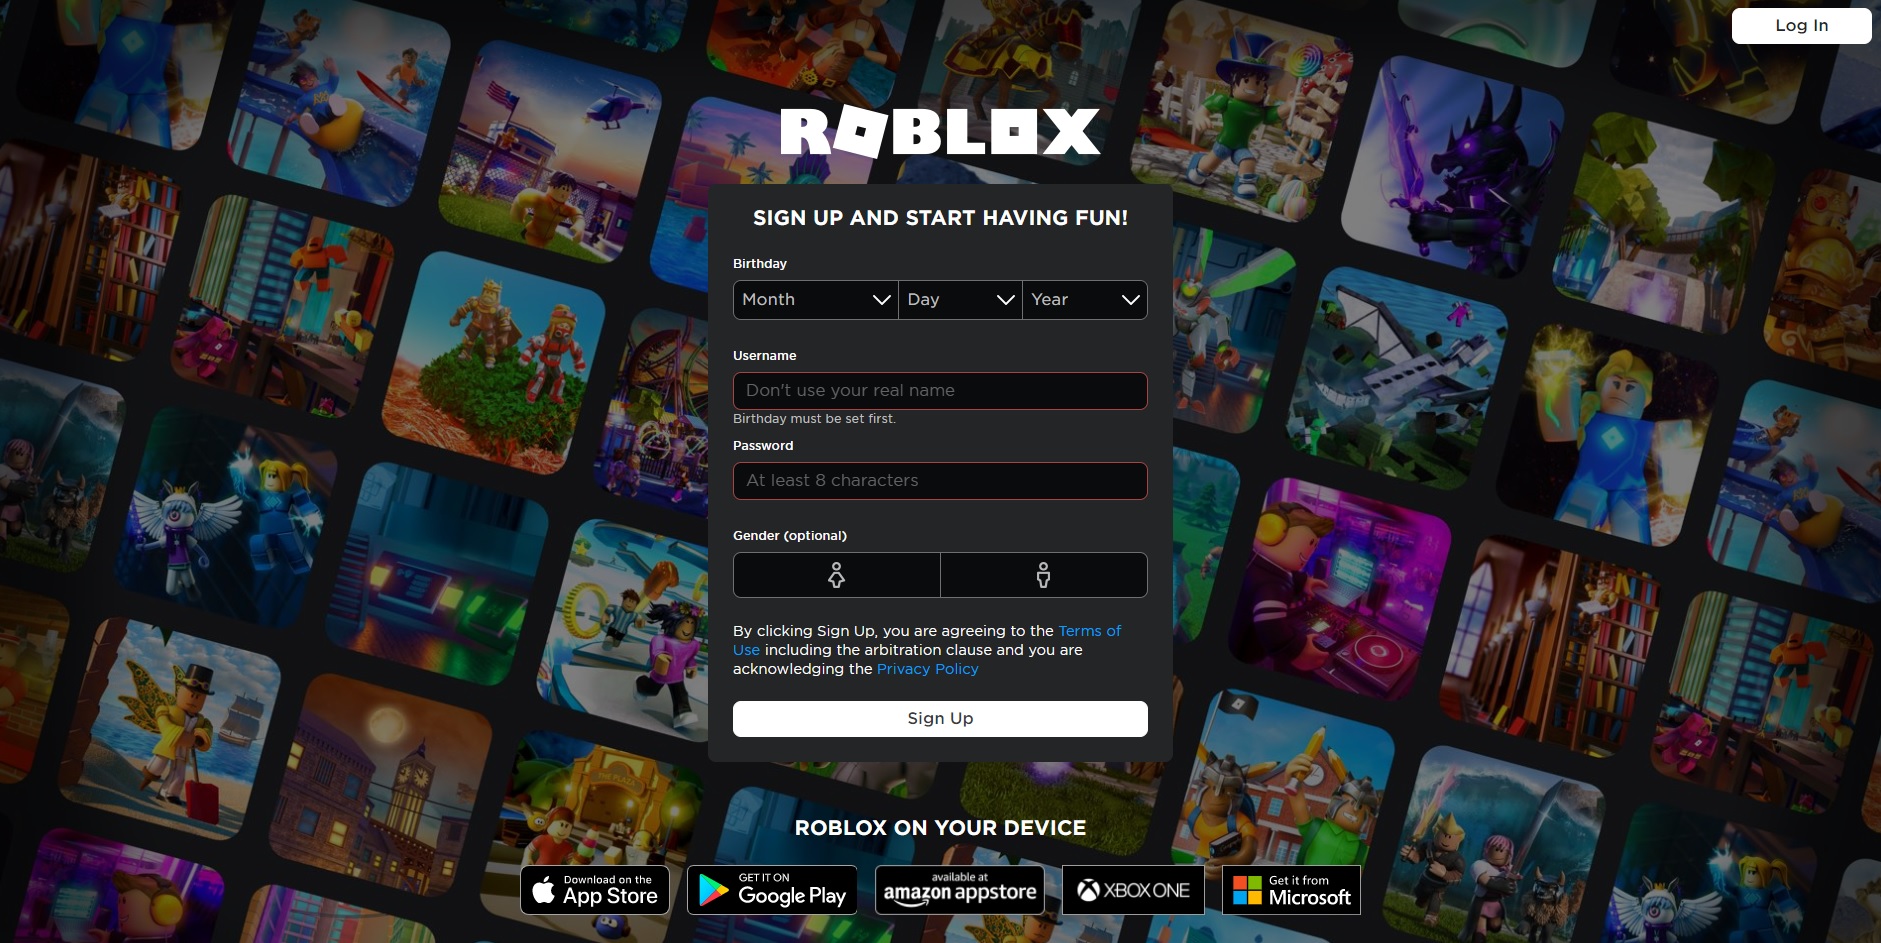 toy codes roblox